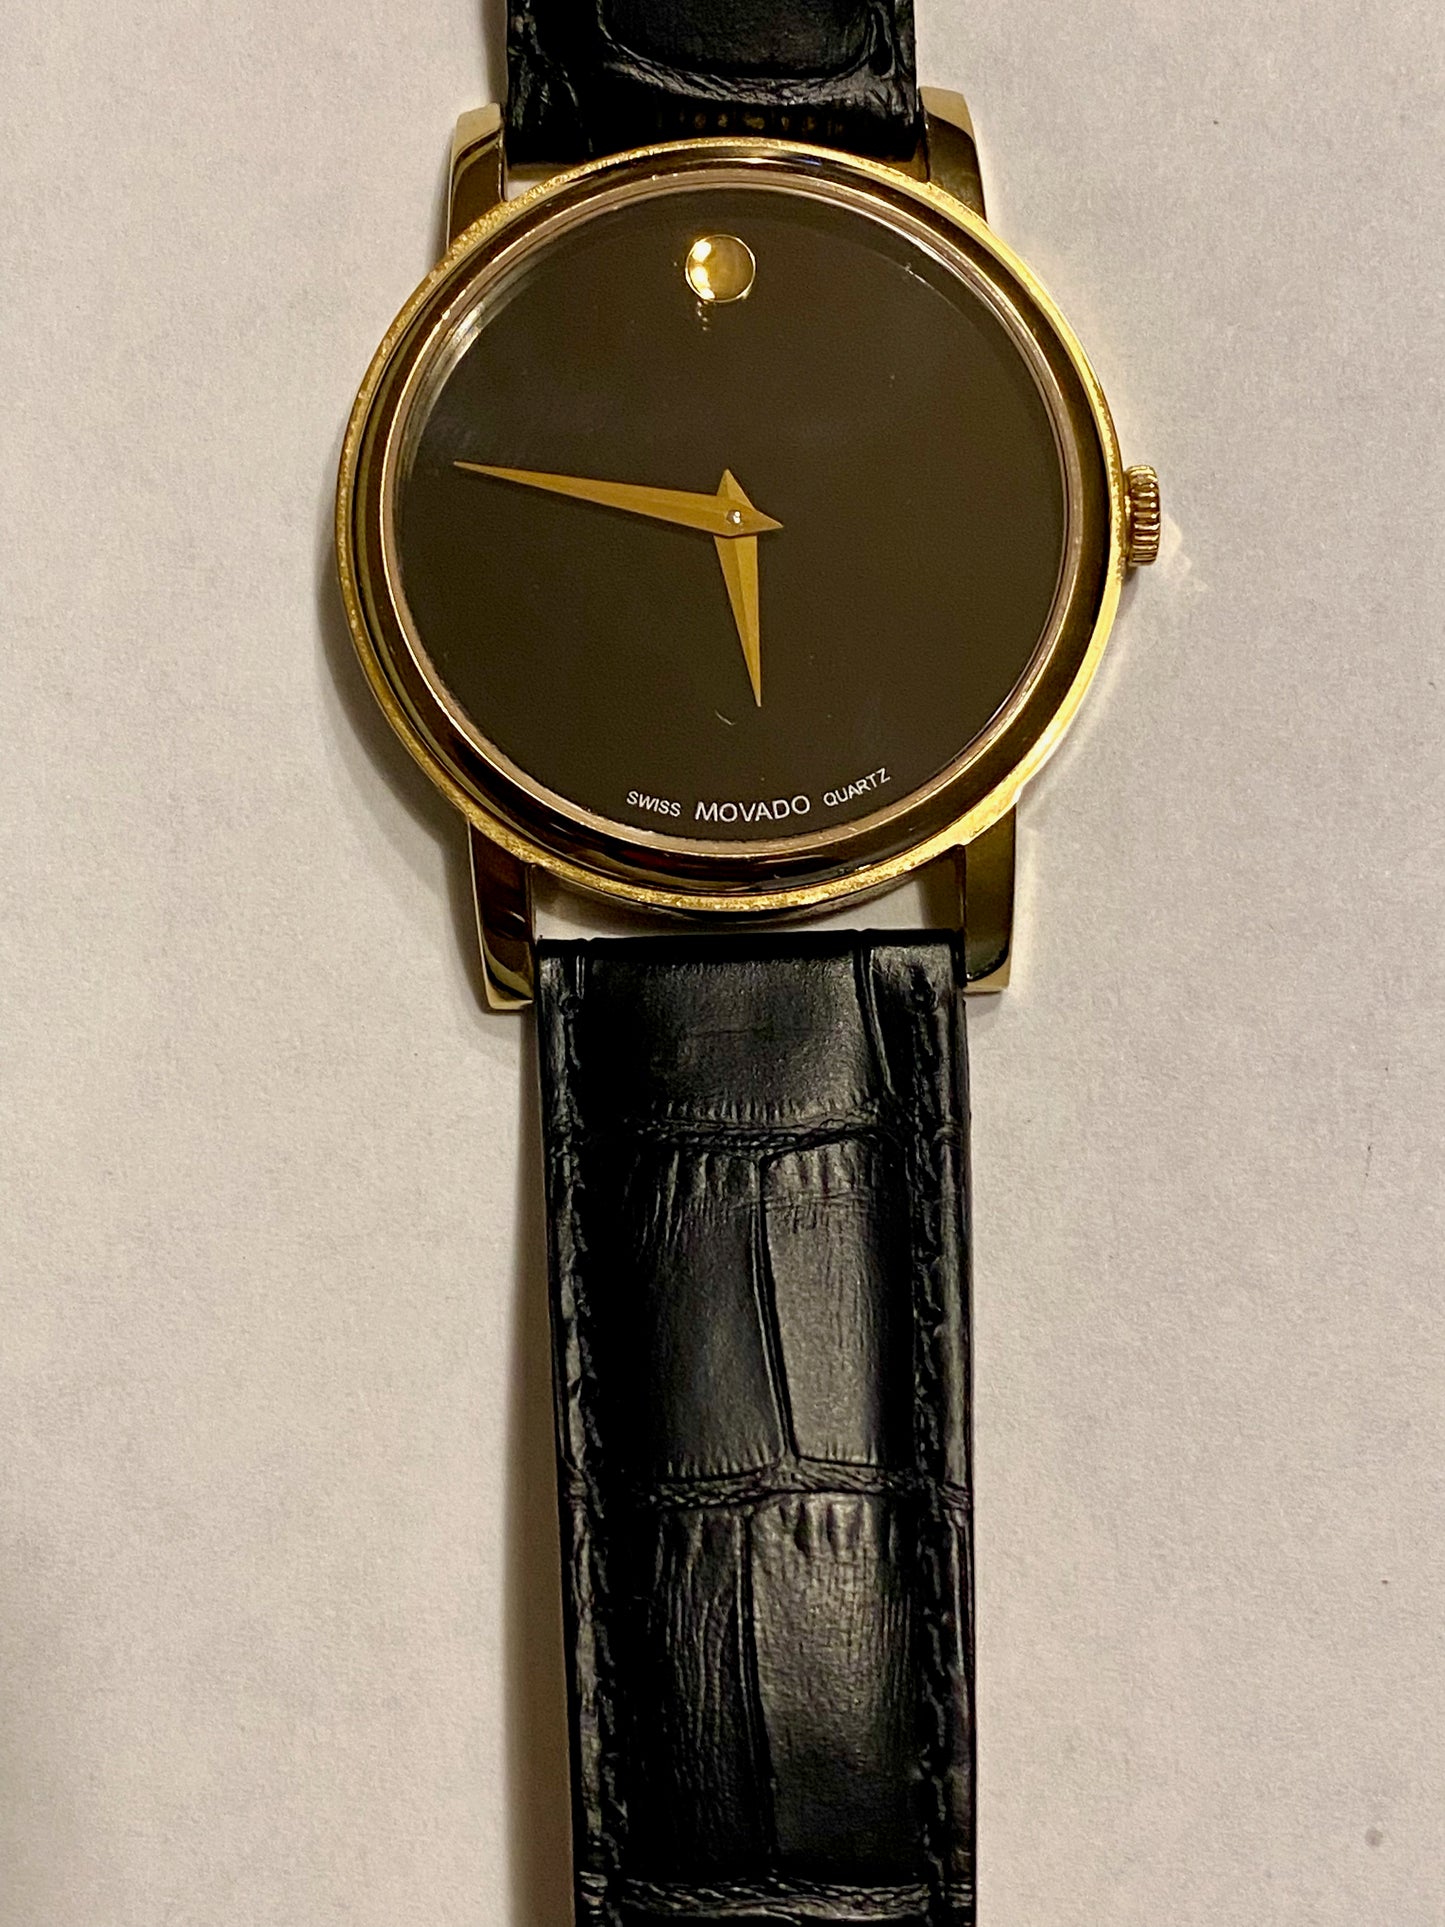 MOVADO Swiss Museum Classic Black Dial Rose Gold Slim Leather Watch $379